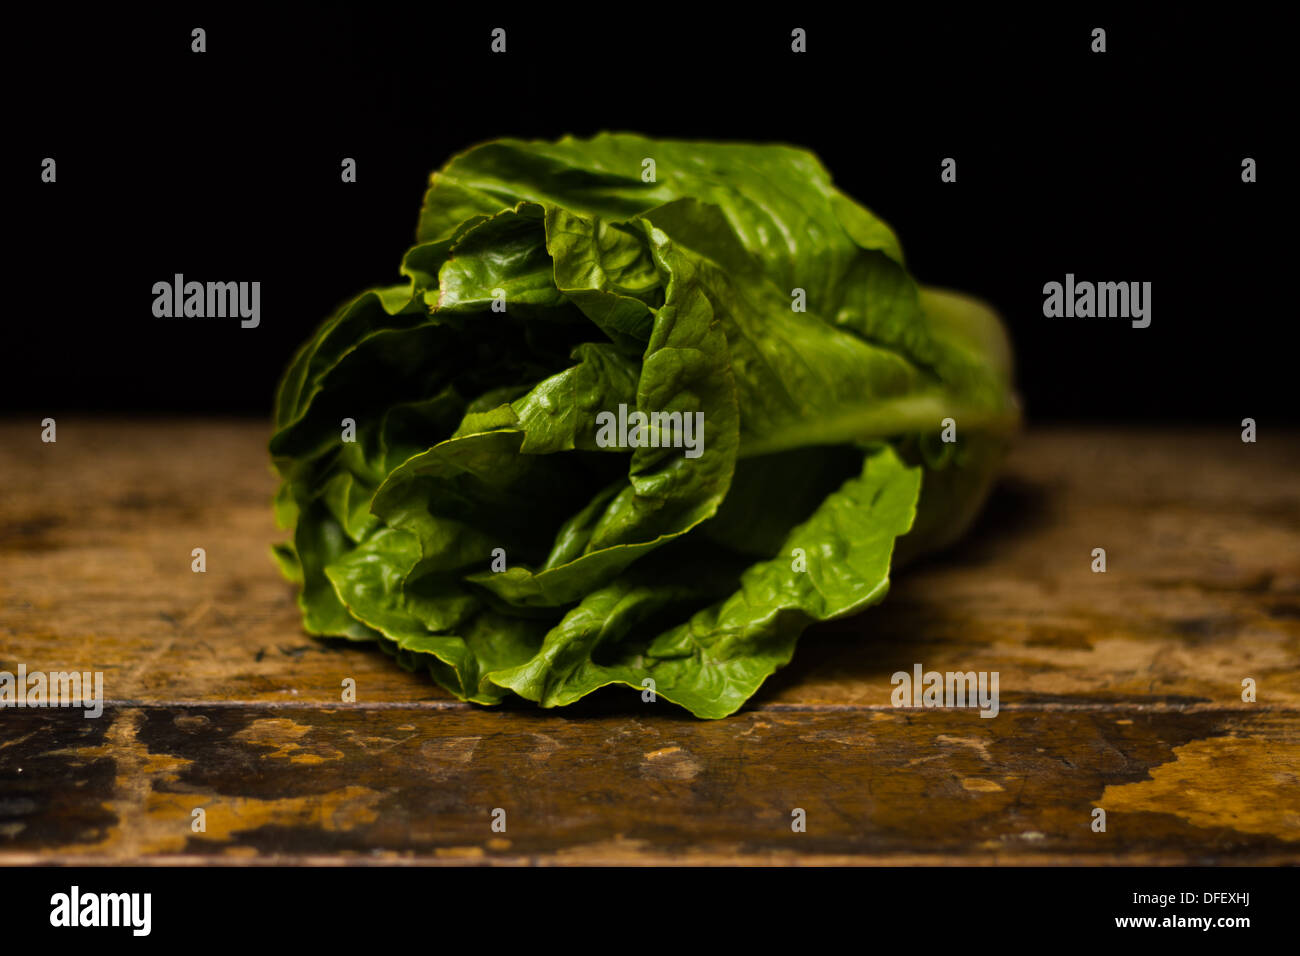 Large head of cos lettuce on wood surface Stock Photo